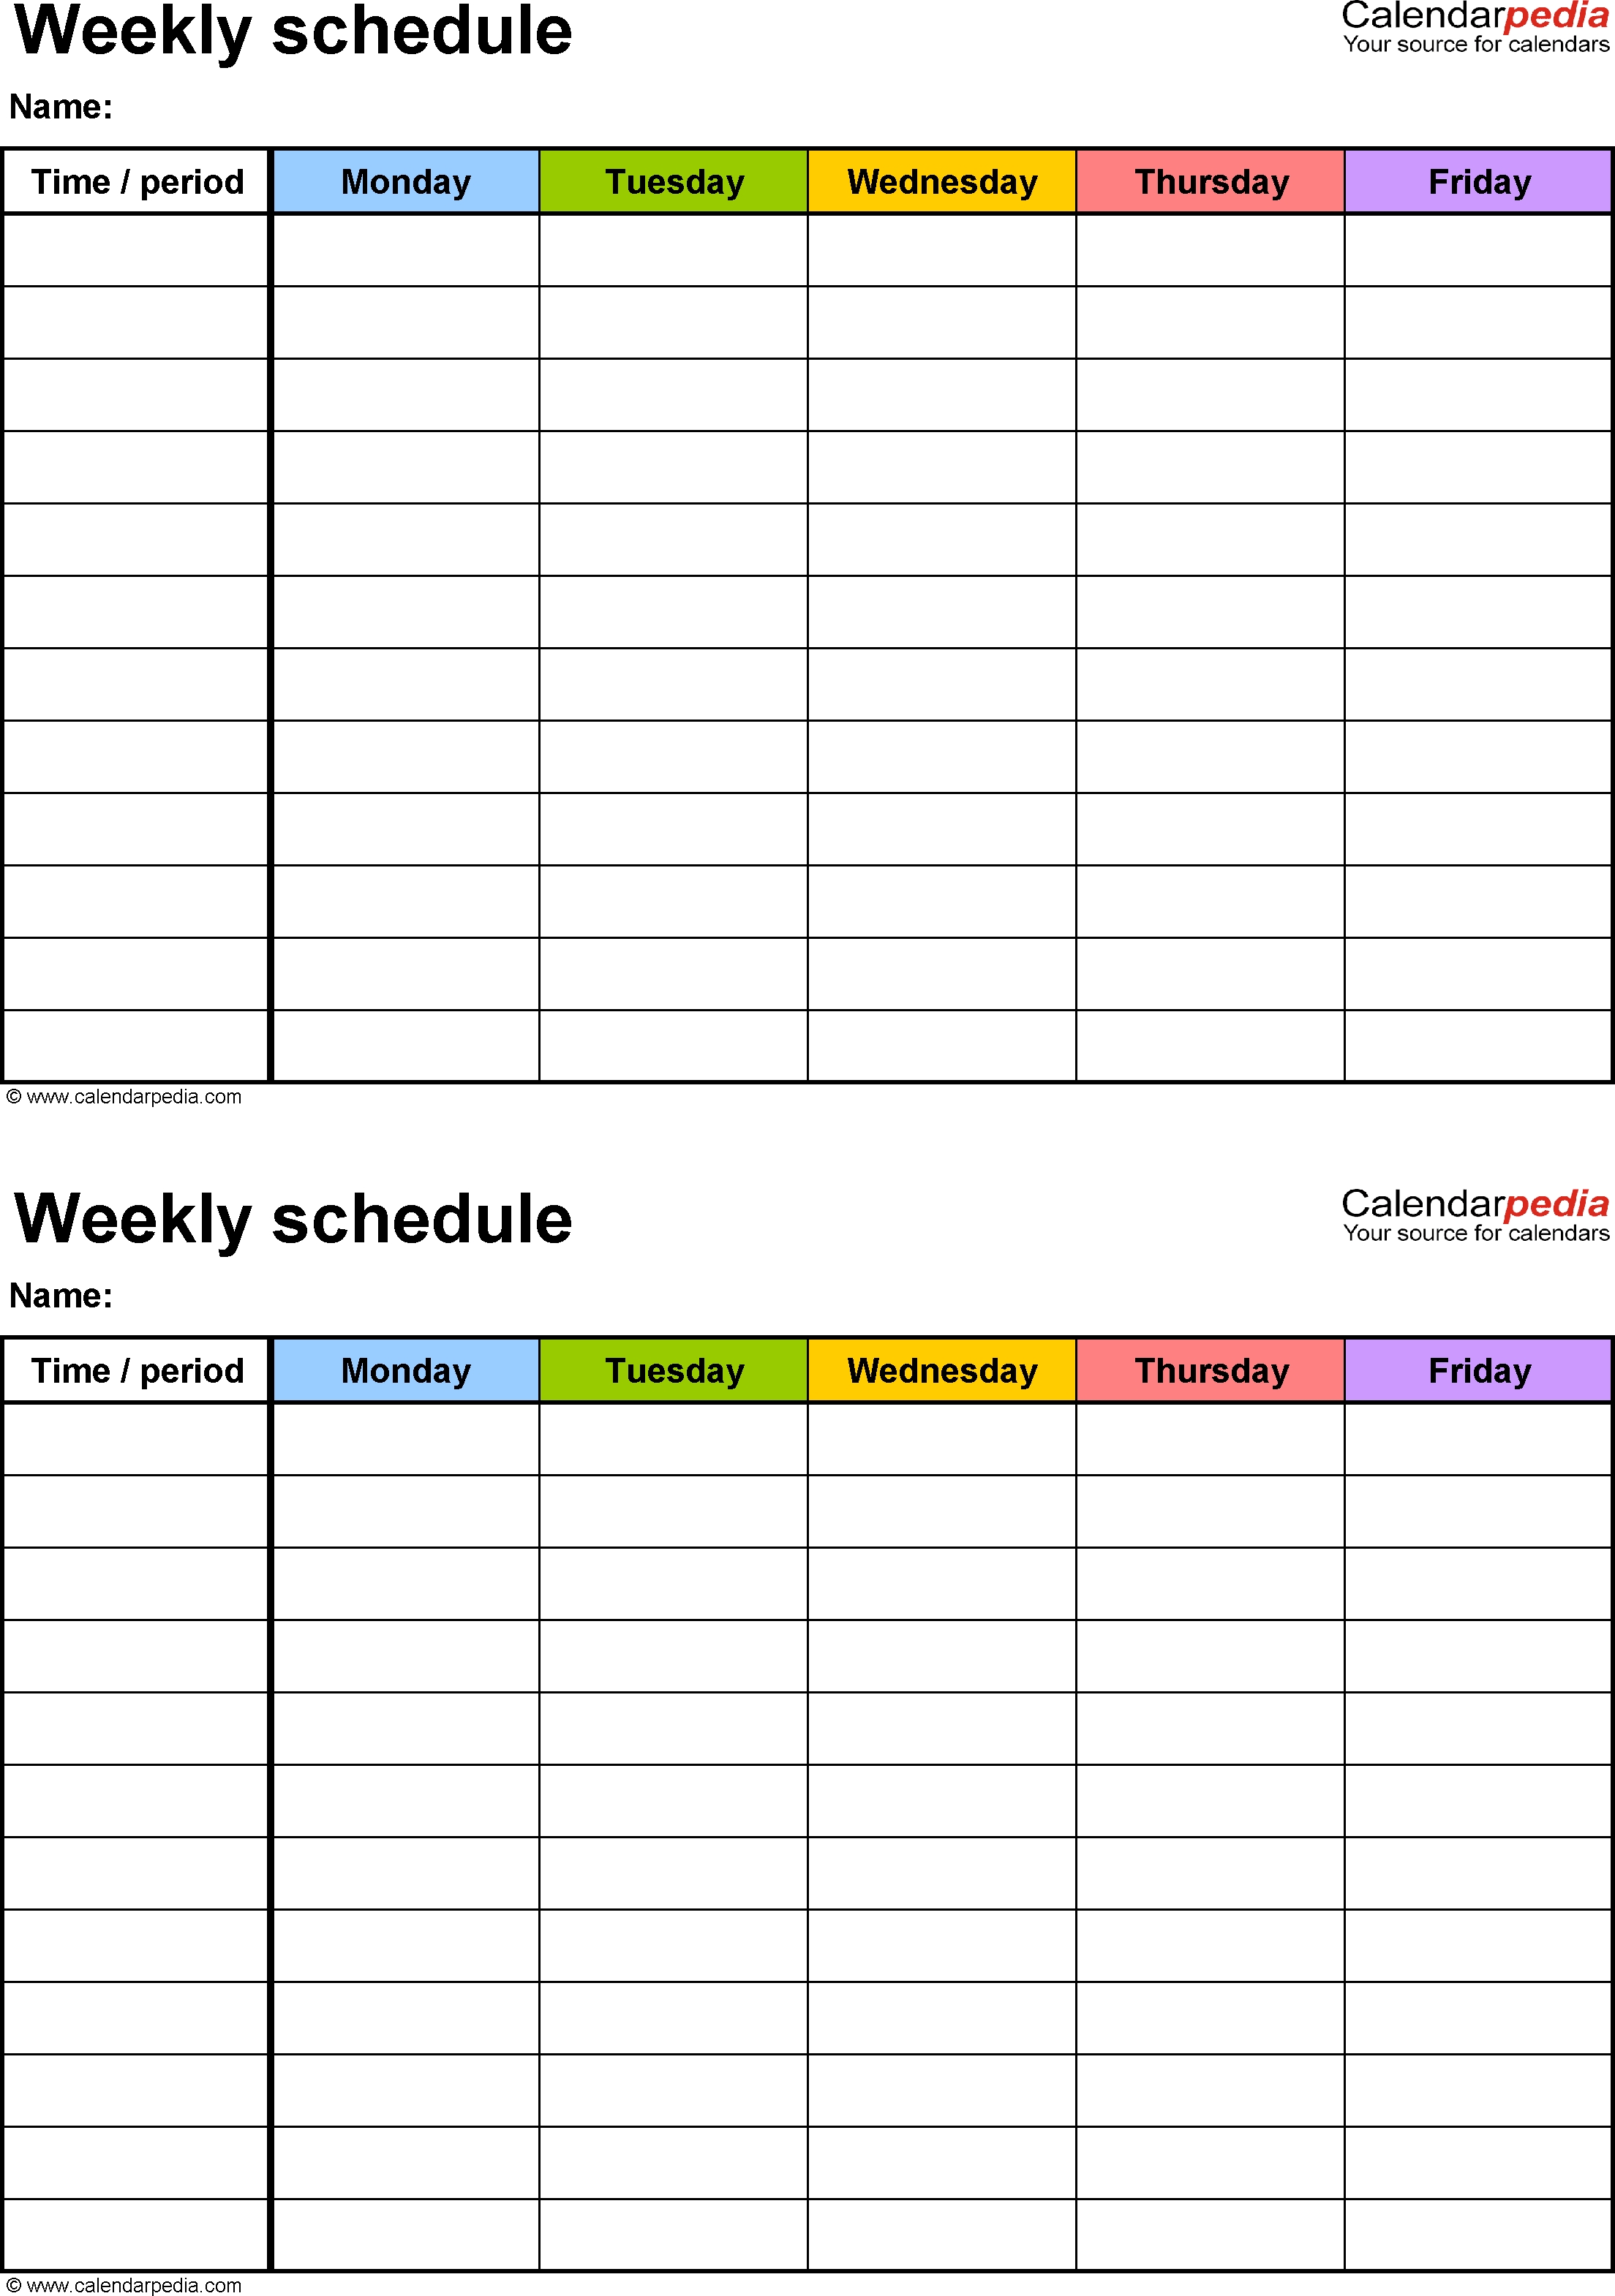 Free Weekly Schedule Templates For Word - 18 Templates-5 Day Weekly Calendar Template